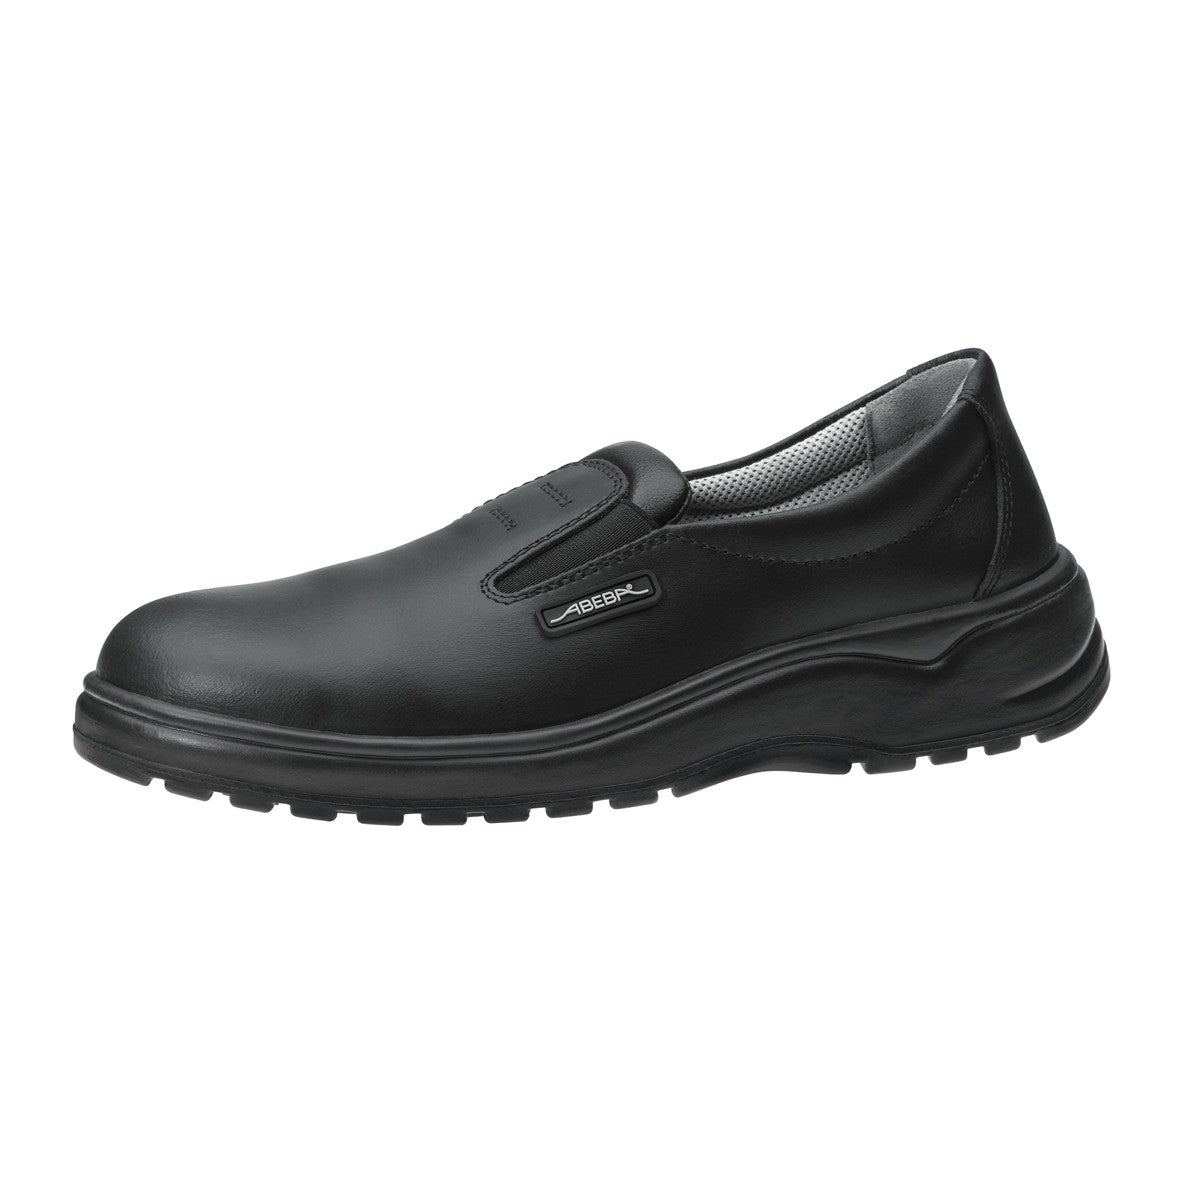 Occupational shoes light Loafer - Black Smooth Leather